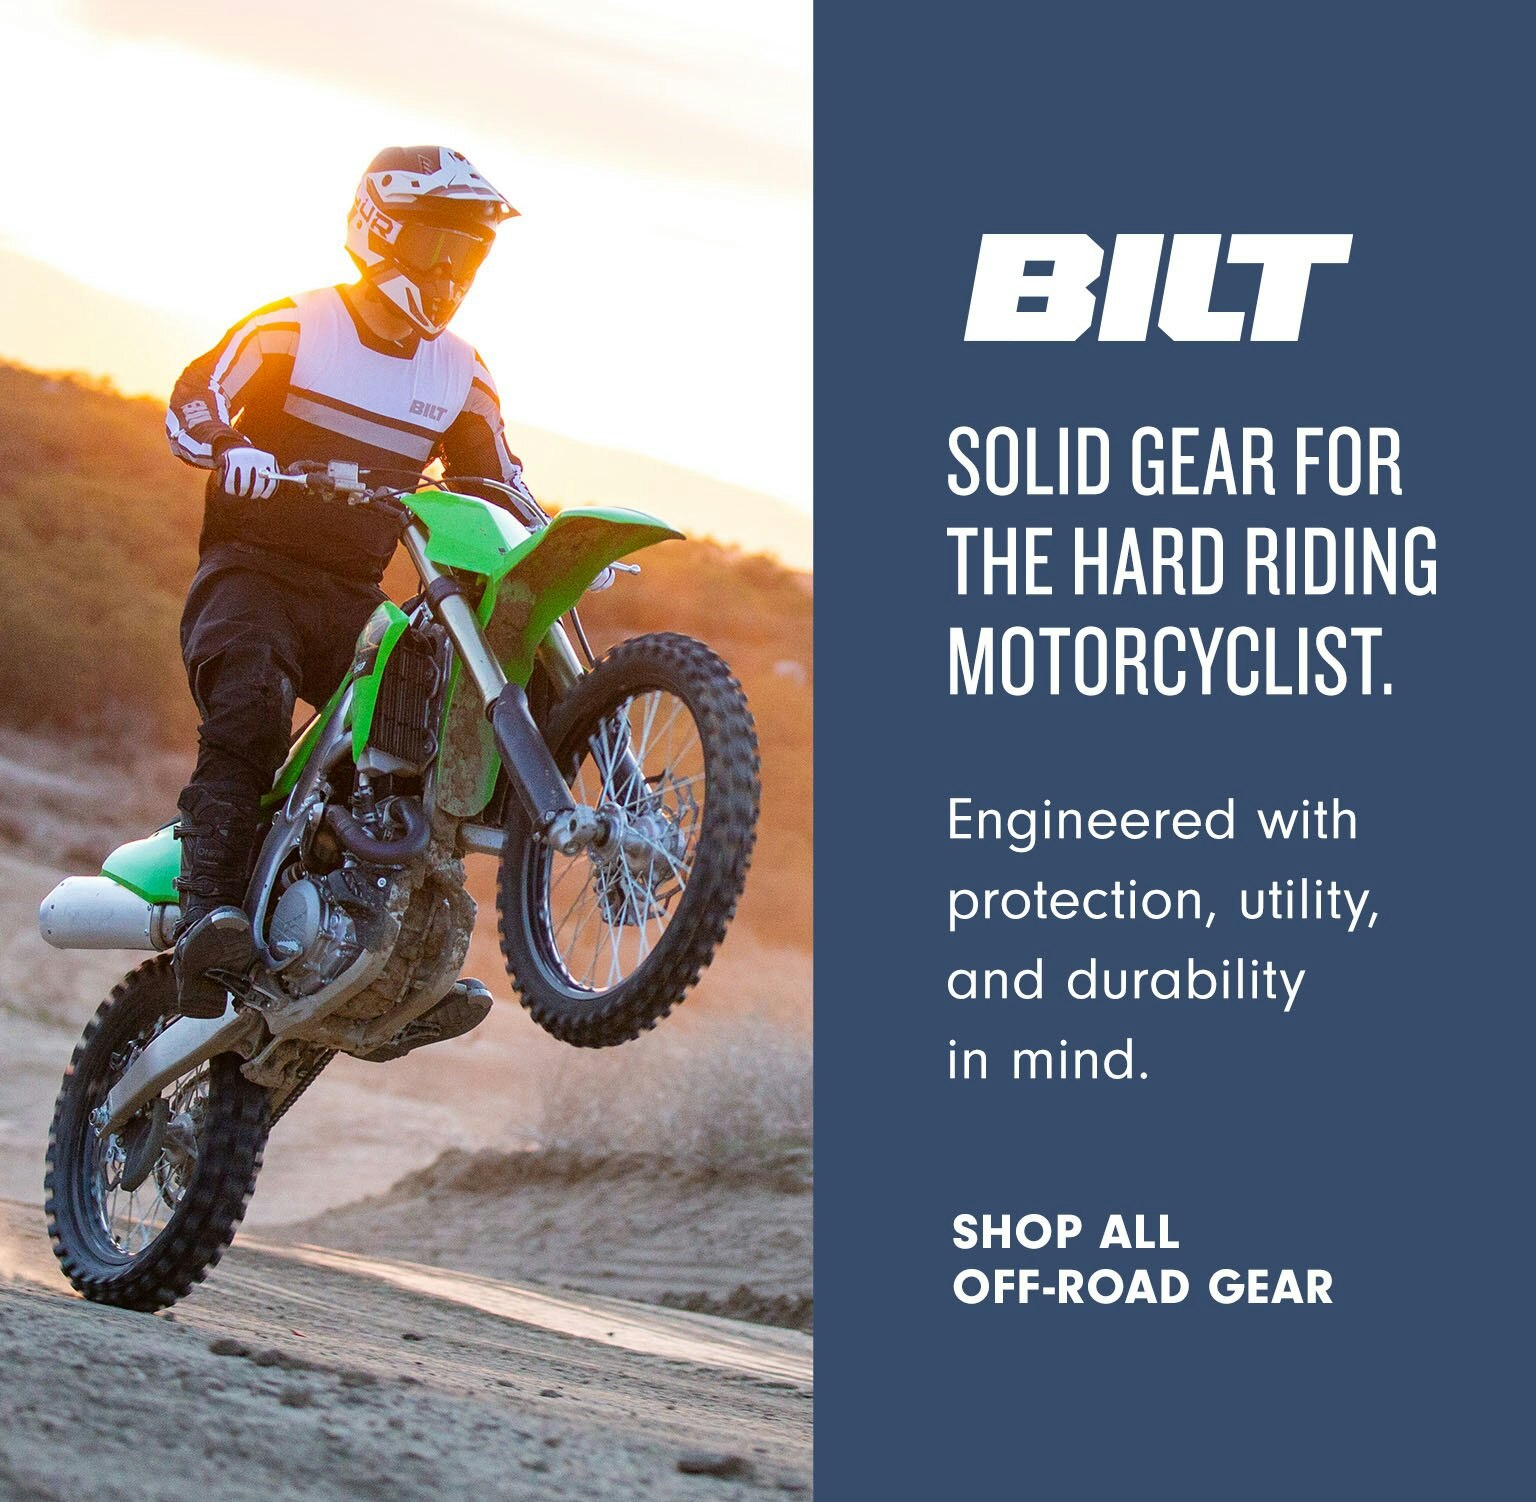 BILT Motorcycle Gear and Apparel